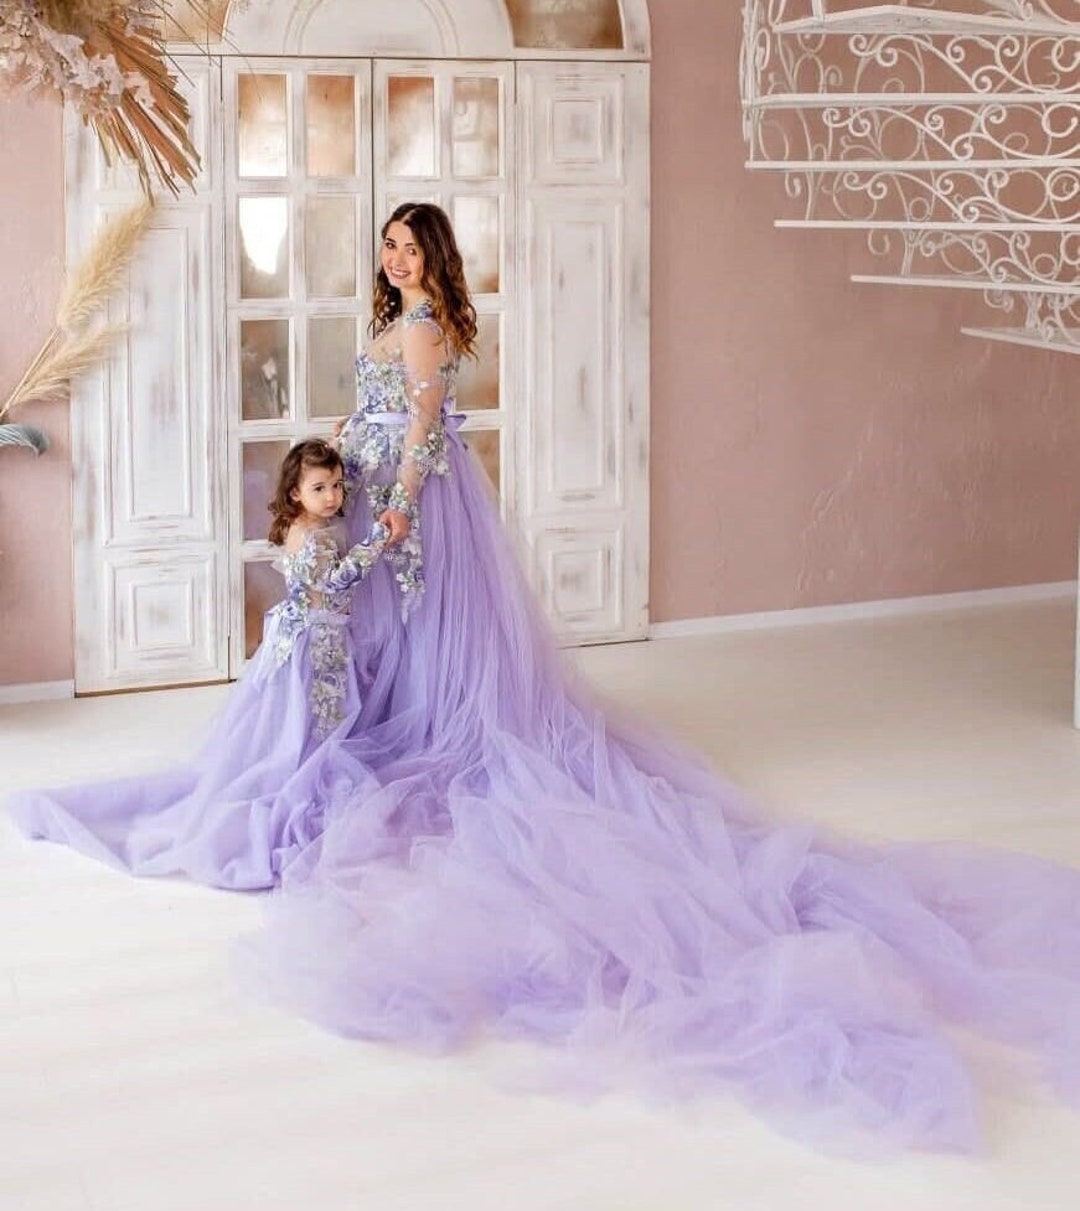 Lavender Matching Dresses Mother Daughter Family Photoshoot - Etsy